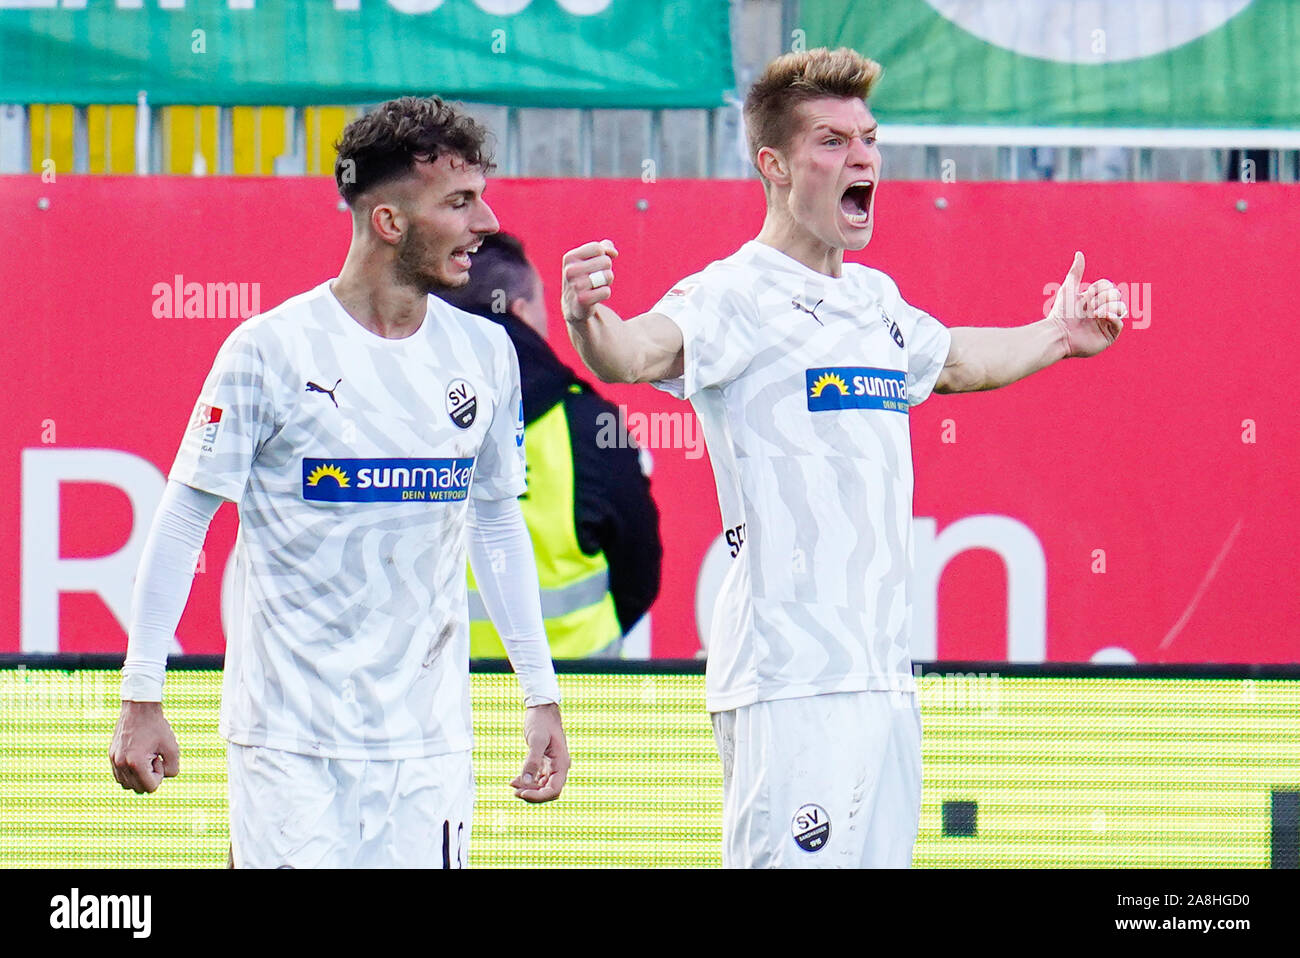 Sandhausen, Germany. 09th Nov, 2019. Soccer: 2nd Bundesliga, SV Sandhausen - SpVgg Greuther Fürth, 13th matchday, in the Hardtwaldstadion. Sandhausens scorer Kevin Behrens (r) cheers with Sandhausens Leart Paqarada (l) over the goal to 2:2. Credit: Uwe Anspach/dpa - IMPORTANT NOTE: In accordance with the requirements of the DFL Deutsche Fußball Liga or the DFB Deutscher Fußball-Bund, it is prohibited to use or have used photographs taken in the stadium and/or the match in the form of sequence images and/or video-like photo sequences./dpa/Alamy Live News Stock Photo